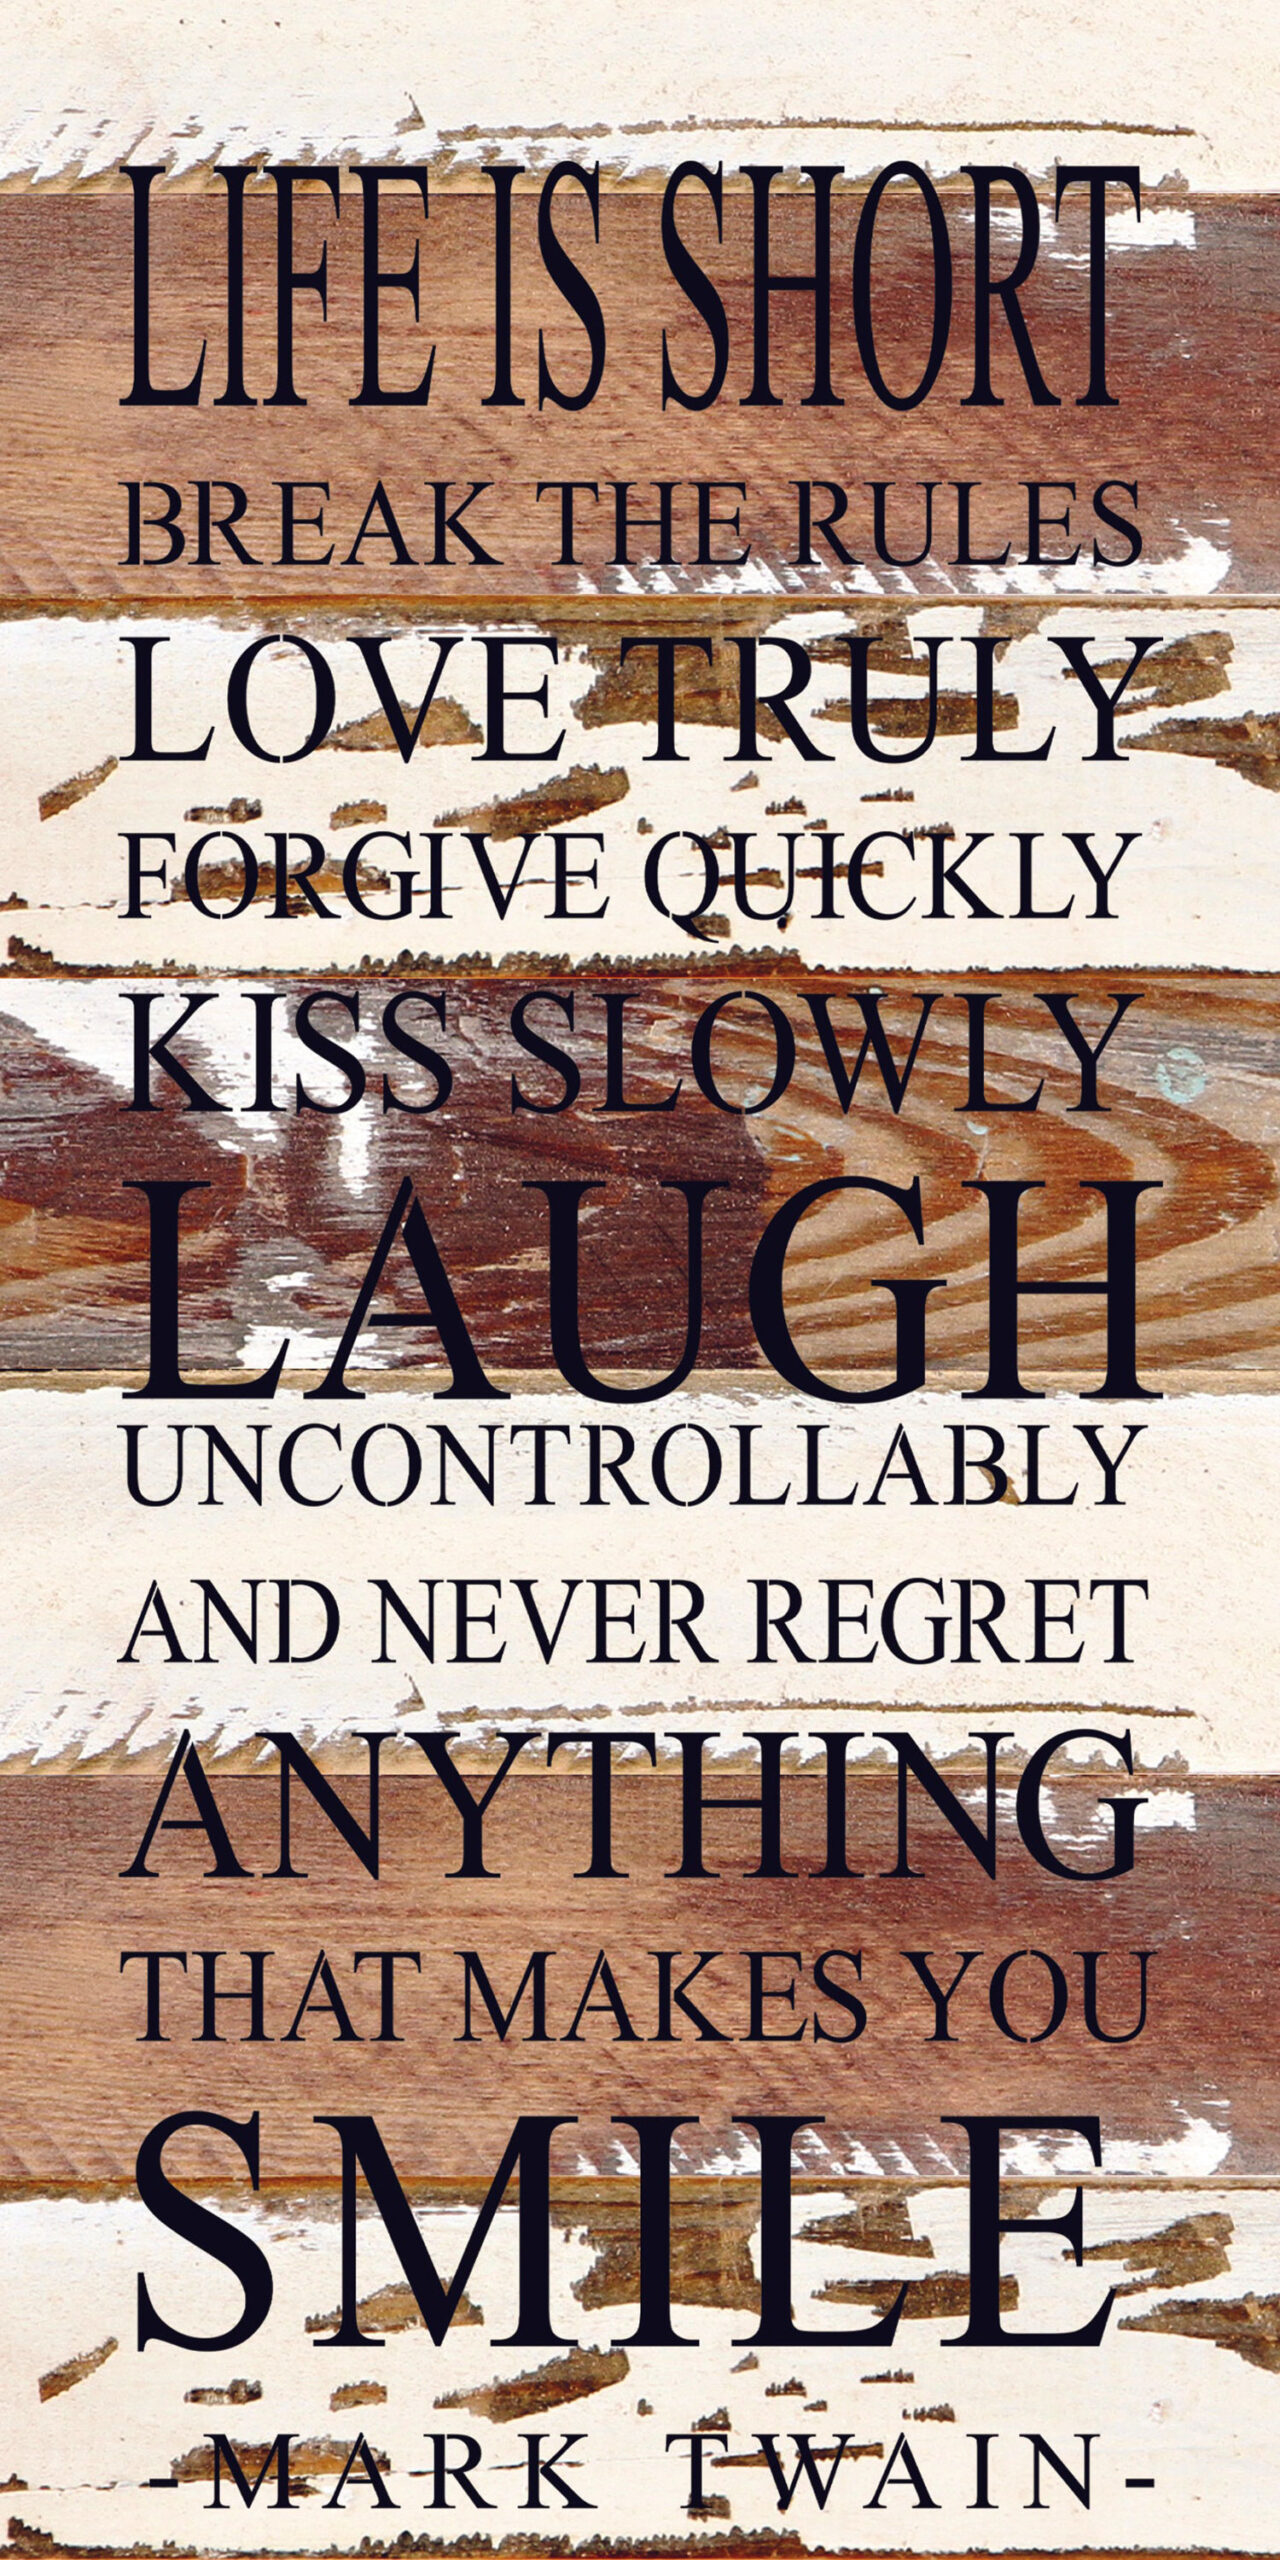 Life is short. Break the rules. Love truly. Forgive quickly. Kiss slowly. Laugh uncontrollably, and never regret anything that makes you smile. -Mark Twain / 12"x24" Reclaimed Wood Sign